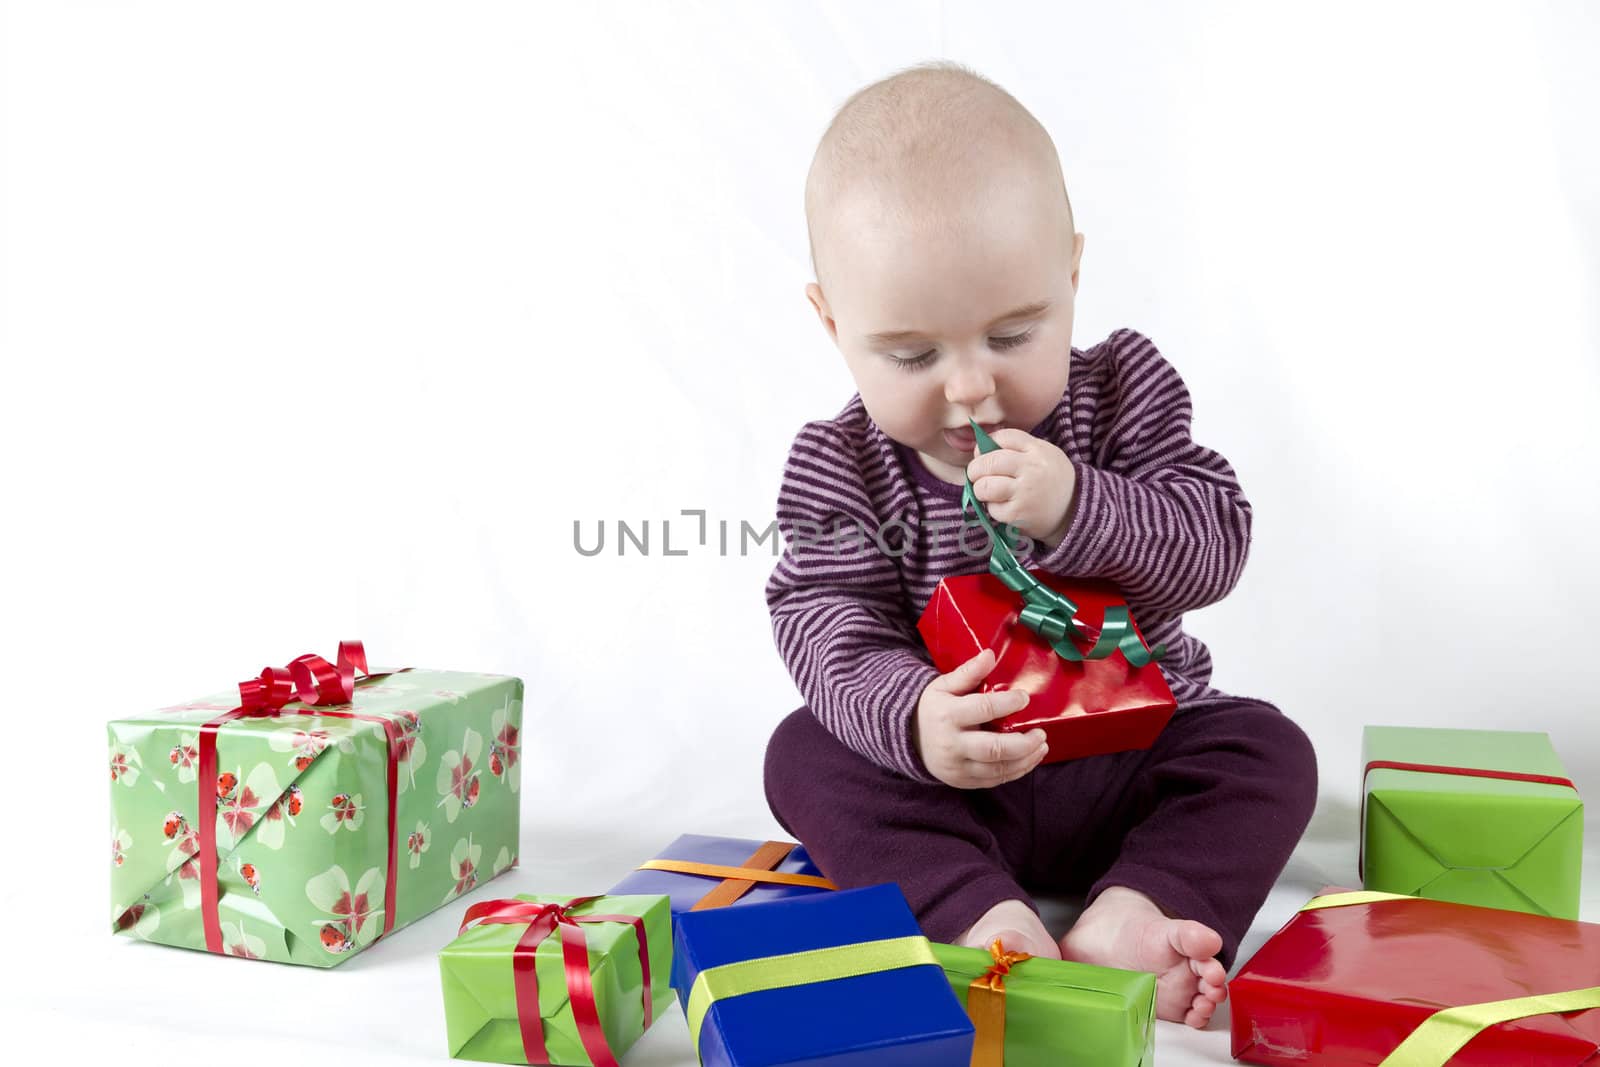 young child unpacking presents. white background